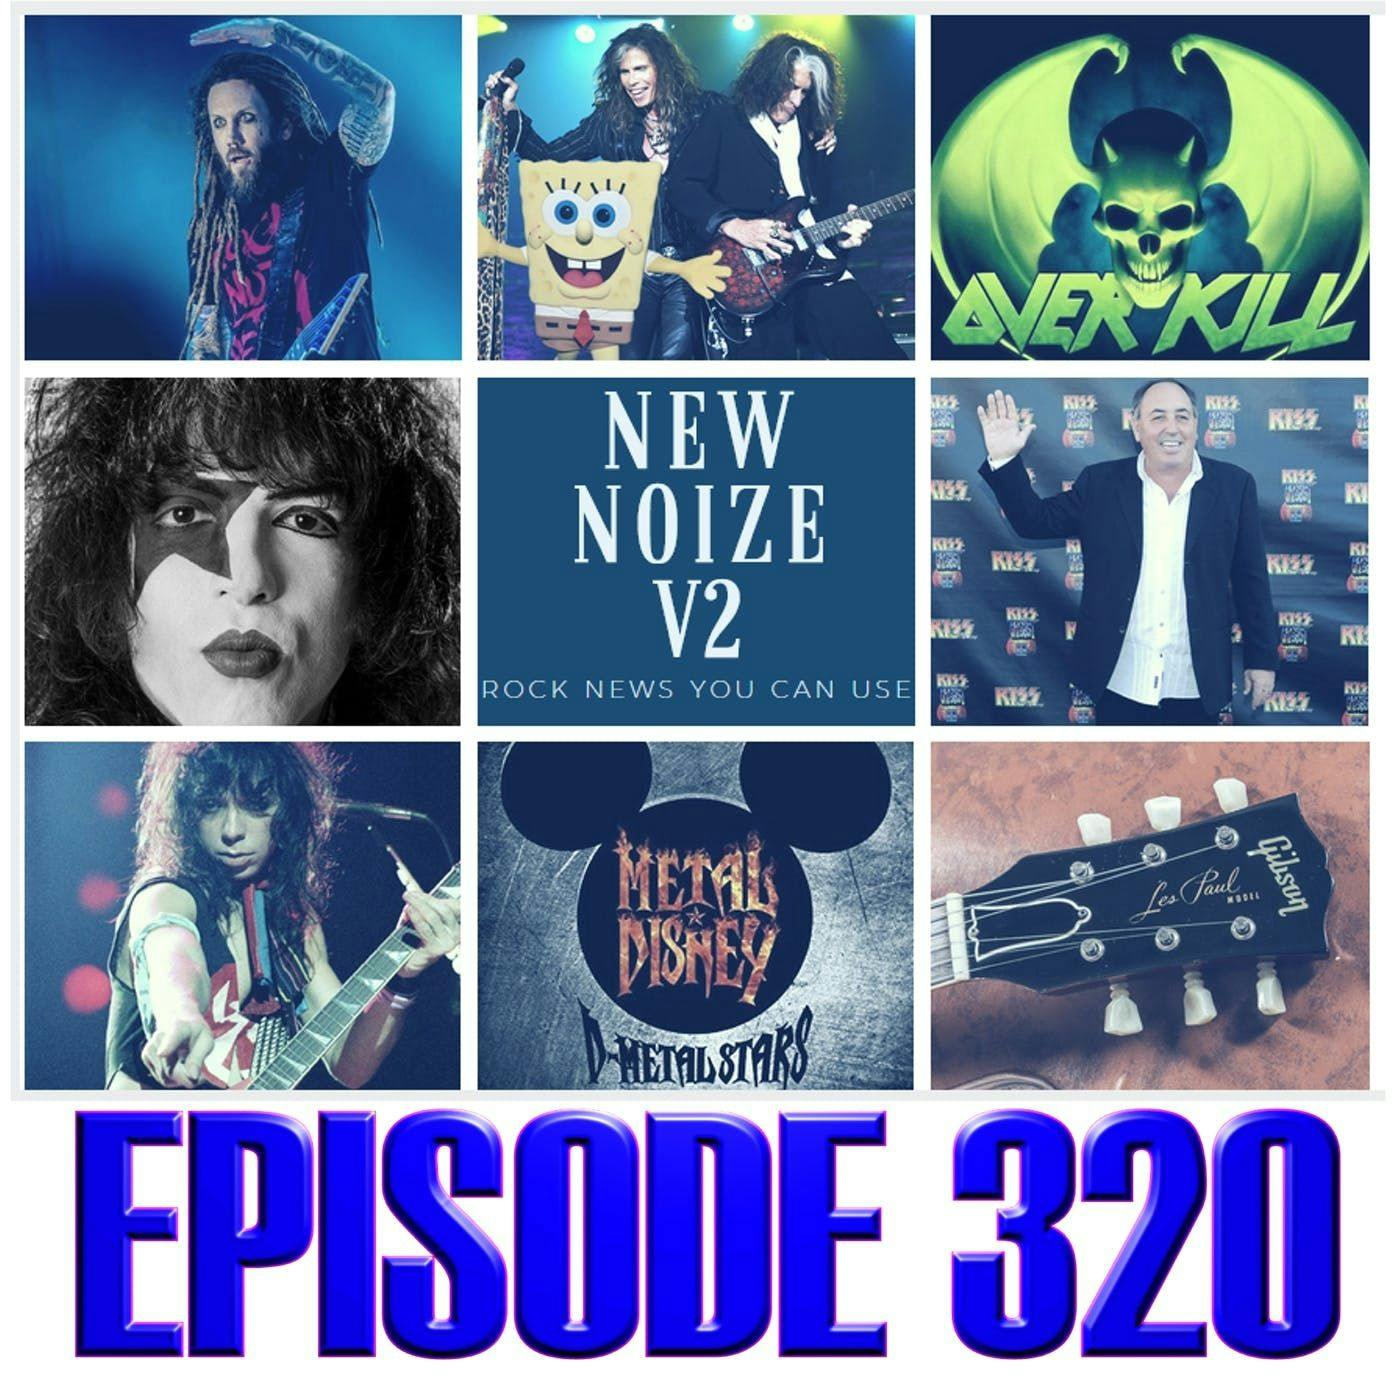 Rock News, Opinion, and a HUGE Announcement - New Noize V2 ep320